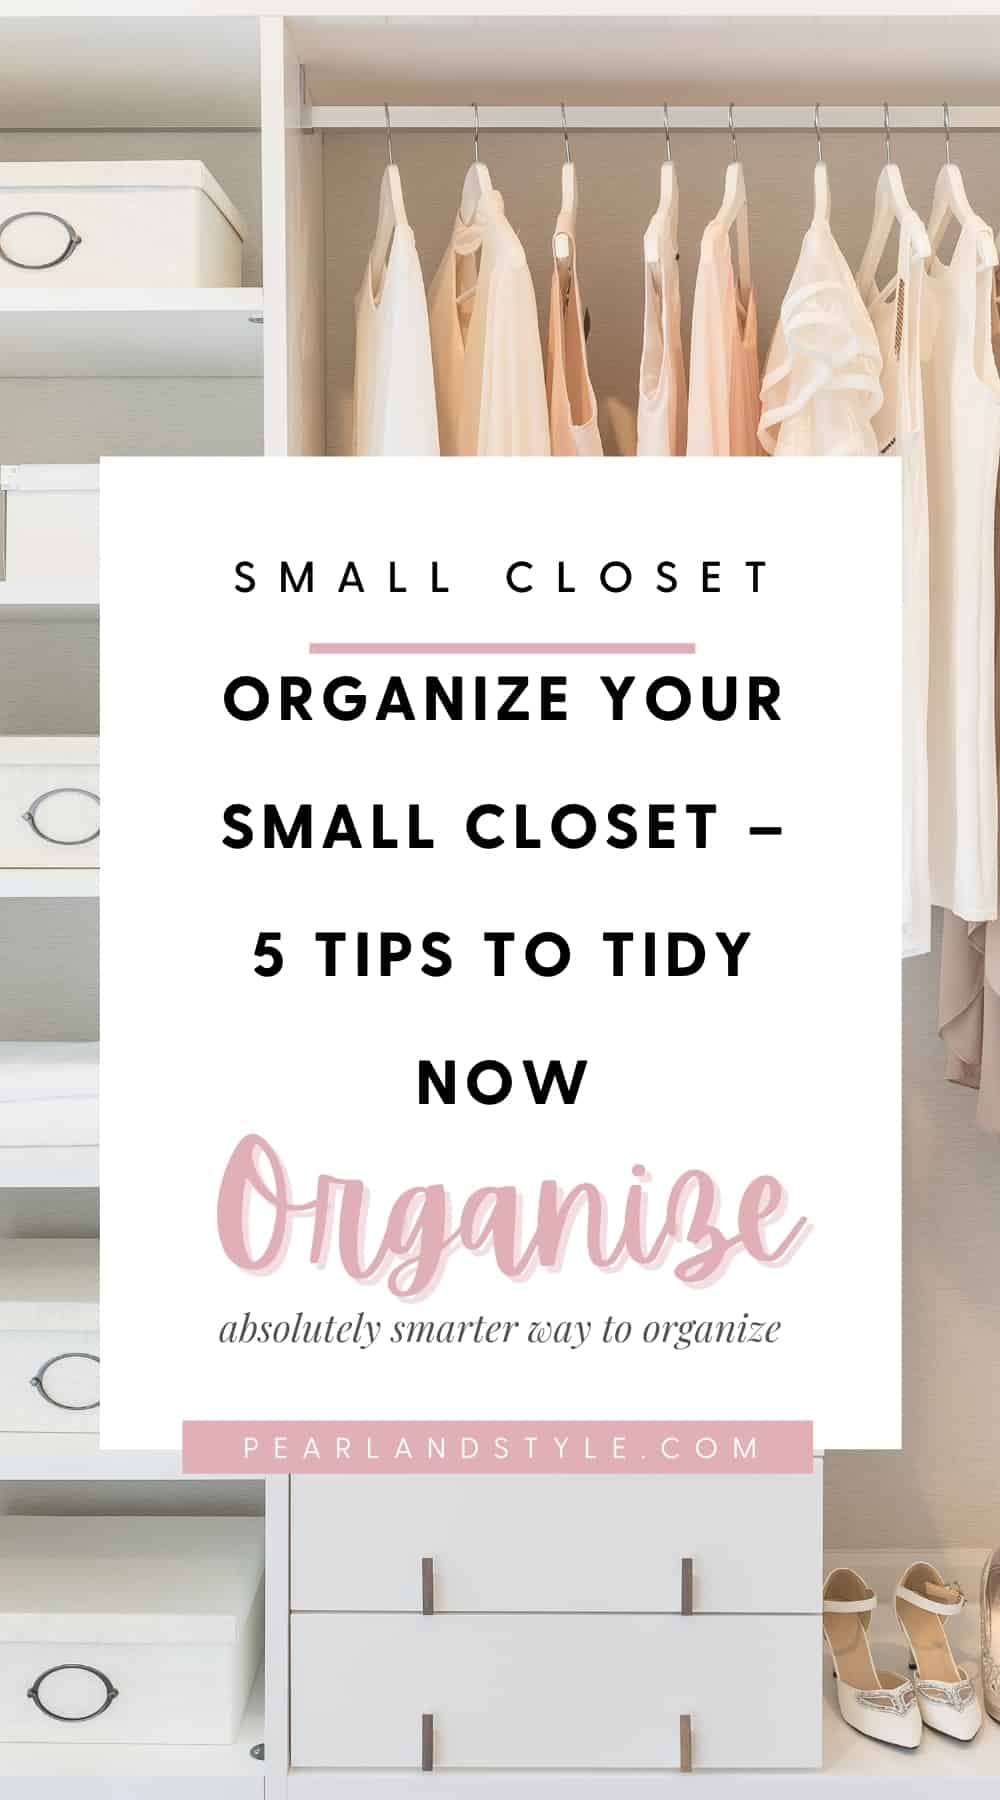 Organize Your Small Closet - 5 Tips to Tidy Now - Pearl and Style ...